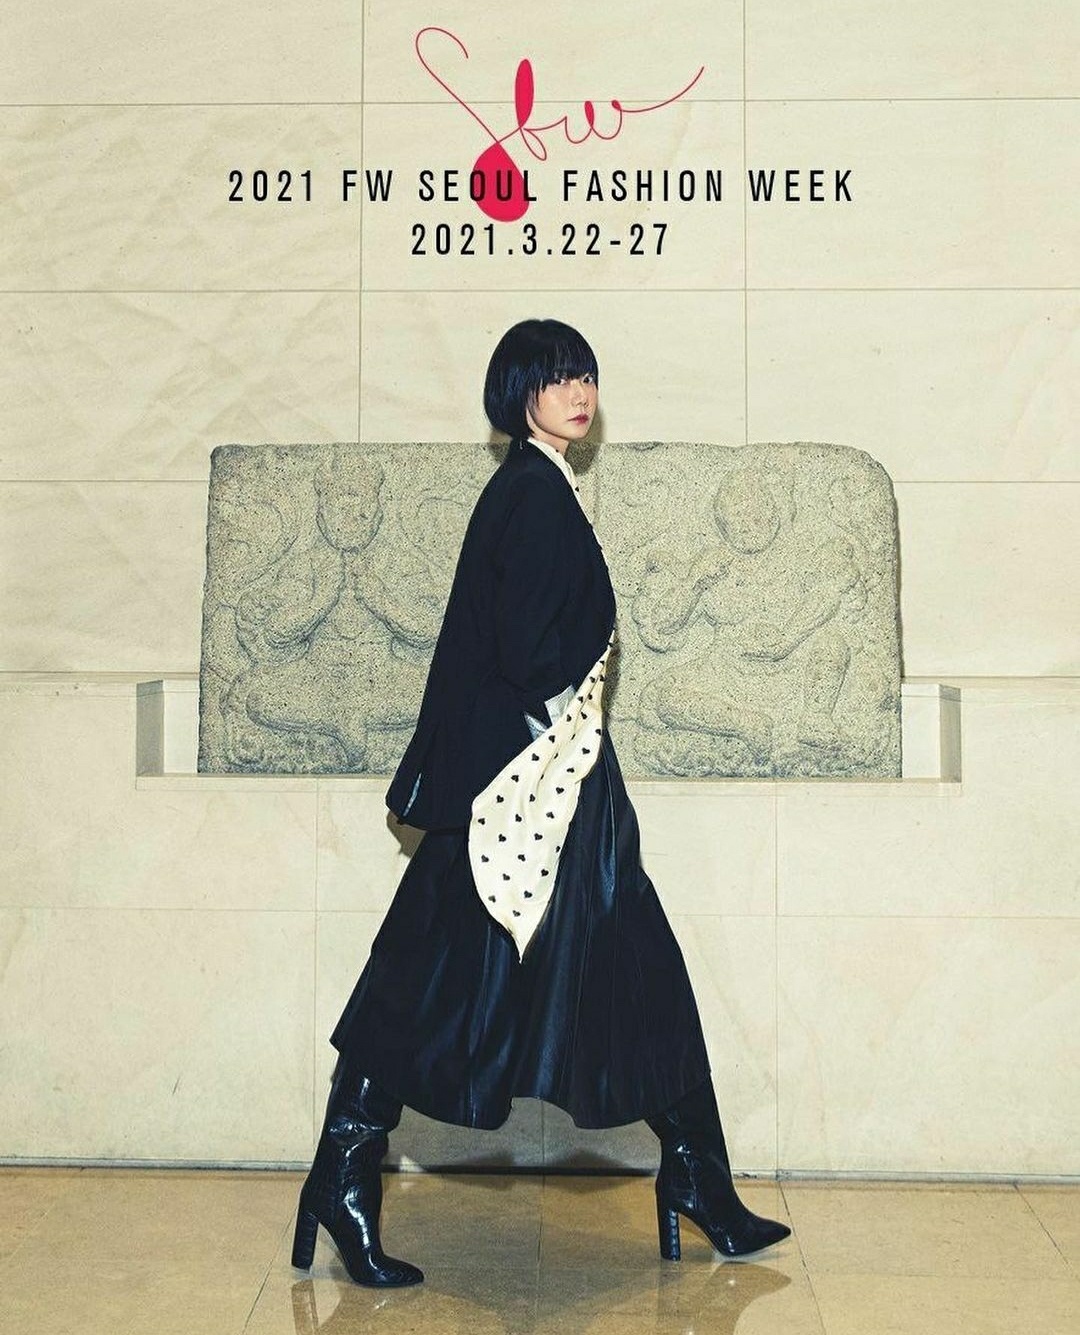 Bae Doona has been appointed as the ambassador of the 2021 fall-winter Seoul Fashion Week (Seoul Fashion Week)